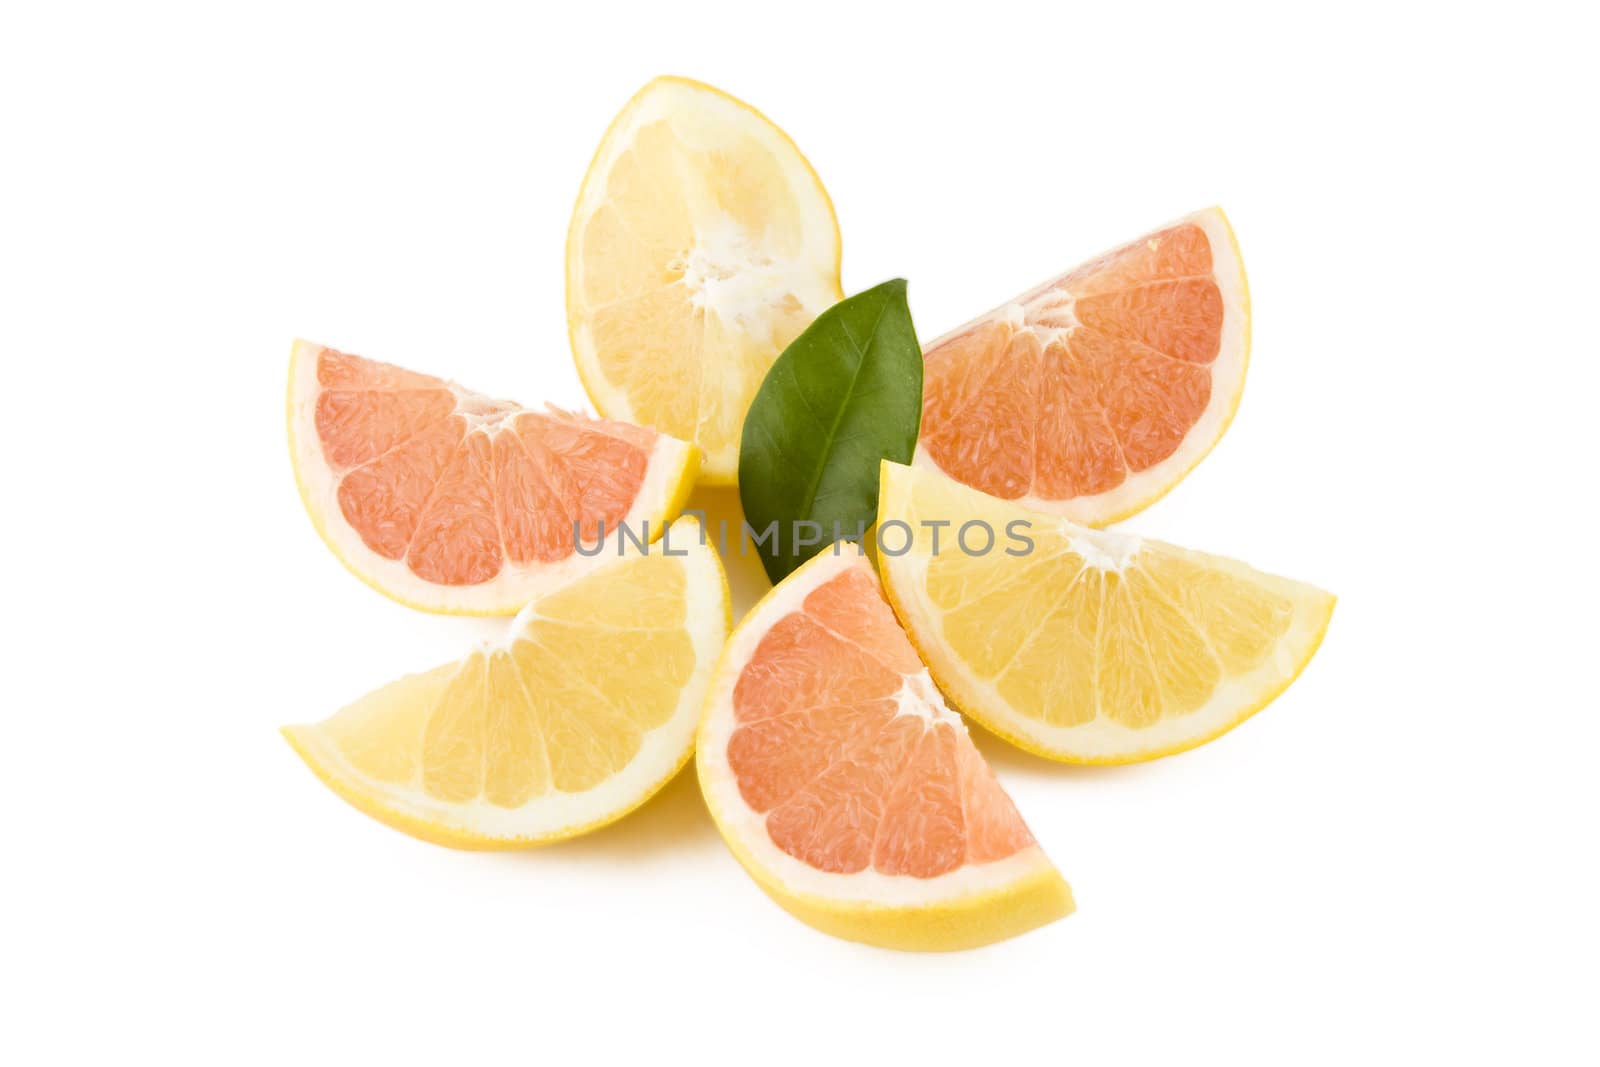 Juicy white and red grapefruits parts isolated on white background